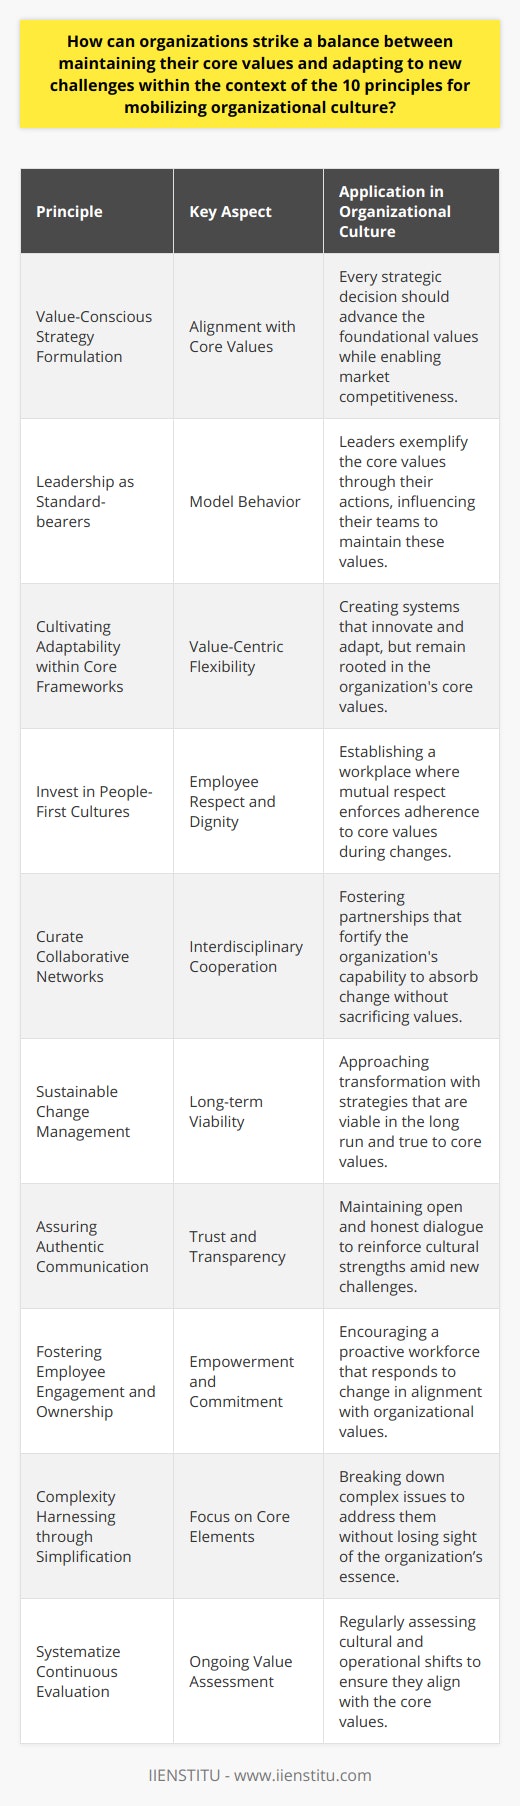 Organizations are living entities fueled by culture and guided by their core values. These values are not just sentimental ideals; they are the compass that directs decision-making, influences behavior, and shapes the identity of every organization. However, the continuous evolution of the market, shifts in the workforce demographic, and rapid technological advancements pose a challenge: how to adapt without losing sight of foundational principles. The answer lies within the ten principles for mobilizing organizational culture, which can preserve core values while fostering an adaptative and responsive organizational environment.1. **Value-Conscious Strategy Formulation**: Strategic decisions must not only focus on market viability but also on value alignment. Each new venture, policy, or procedure should be evaluated through the lens of core values, ensuring that strategic shifts enhance rather than erode the foundation of the organization.2. **Leadership as Standard-bearers**: Leaders have the distinct role of embodying core values. Their behavior, communication, and decisions must consistently reflect these values, serving as role models that inspire their teams to carry the torch even in the face of novel challenges.3. **Cultivating Adaptability within Core Frameworks**: Staying true to core values does not mean rigidity. Organizations should build adaptable frameworks that allow flexibility and innovation while keeping core values at the heart of these changes.4. **Invest in People-First Cultures**: By treating every member with respect and dignity aligned with core values, organizations can create a robust workforce ready to support one another through change, thus fostering a collective resilience.5. **Curate Collaborative Networks**: Modern challenges often require cross-disciplinary solutions. Cultivating networks within and outside of the organization facilitates the exchange of ideas, strengthening the organization's ability to assimilate change without compromising on core values.6. **Sustainable Change Management**: When presented with new challenges, change management should be sustainable, aligning closely with core values to ensure they're not compromised in pursuit of innovation or adaptation.7. **Assuring Authentic Communication**: Honest and transparent communication reinforces trust, a key element of any strong culture. When tackling new challenges, communication that aligns with core values solidifies group cohesion and collective purpose.8. **Fostering Employee Engagement and Ownership**: Engaged employees who understand and share the organization's core values are more likely to approach new challenges with enthusiasm and a sense of ownership, aligning their problem-solving efforts with what the organization stands for.9. **Complexity Harnessing through Simplification**: Reducing complex challenges to their core elements aids in maintaining focus on values. By simplifying problems, organizations can respond to challenges in ways that resonate with their fundamental principles.10. **Systematize Continuous Evaluation**: Lastly, a methodical approach to continuous evaluation ensures that shifts in culture or practice due to new challenges are always assessed against core values, preventing drift and maintaining organizational authenticity.Each of these principles serves as a pillar that sustains an organization's core values even as it navigates through the turbulent seas of change. When applied thoughtfully, they can form a comprehensive framework that enables organizations to not only survive disruption but also to thrive, leveraging it as a catalyst for growth and reinforcement of their cultural bedrock.In essence, the ten principles for mobilizing organizational culture work in concert towards a common objective: ensuring that an organization's essential DNA remains intact, no matter what external challenges may arise. By building upon these principles, organizations like IIENSTITU can both preserve their cherished core values and evolve successfully in an ever-changing world.